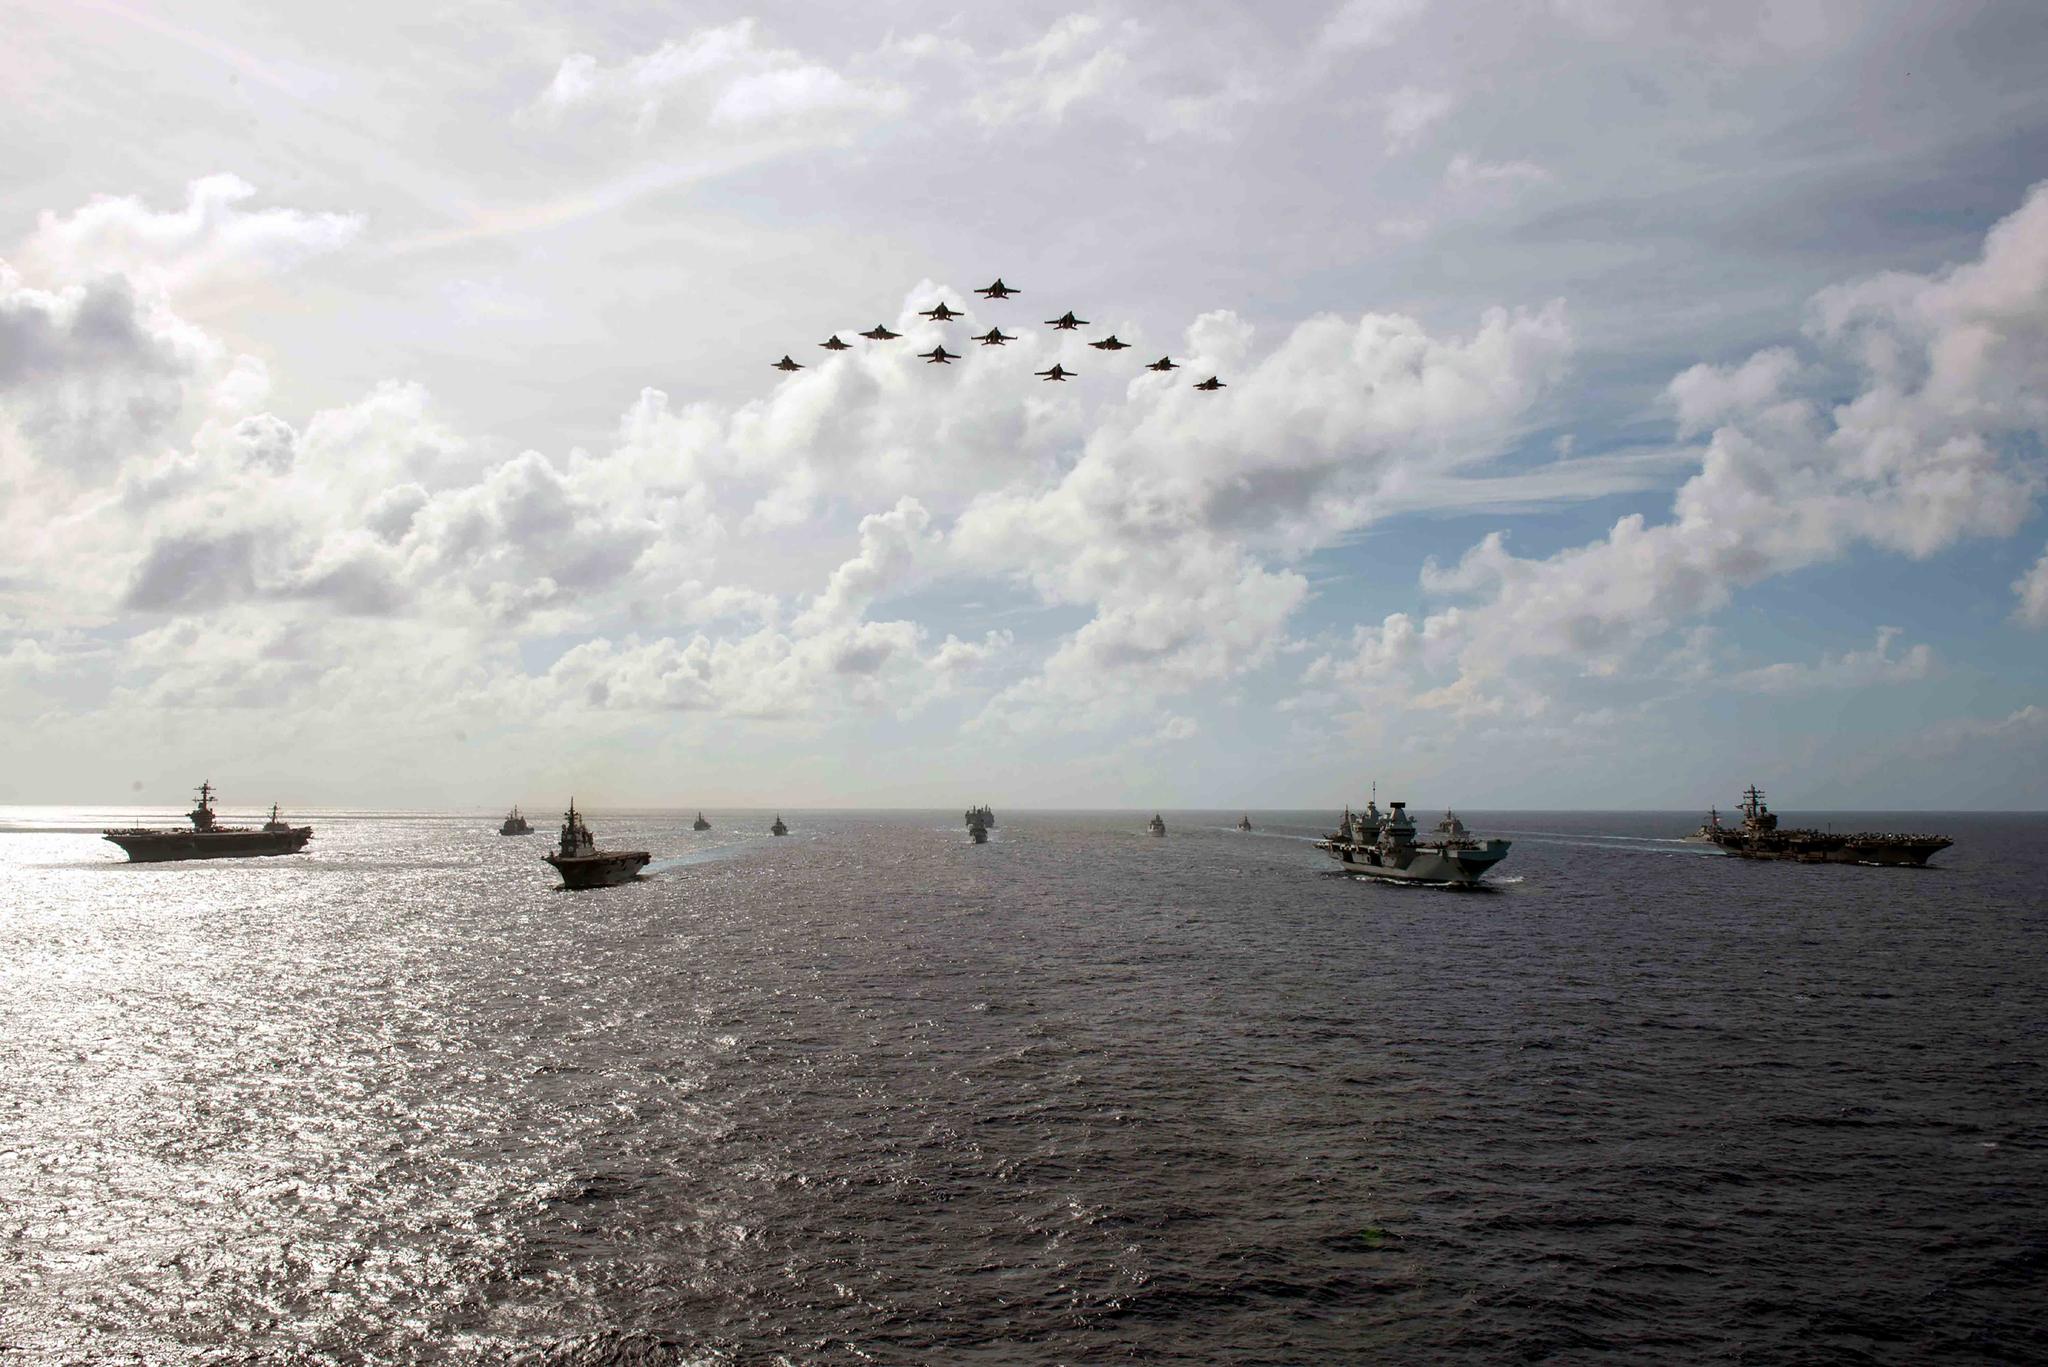 In this photo released by the U.S. Indo-Pacific Command, the United Kingdom's carrier strike group led by HMS Queen Elizabeth (R 08), and Japan Maritime Self-Defense Forces led by (JMSDF) Hyuga-class helicopter destroyer JS Ise (DDH 182) joined with U.S. Navy carrier strike groups led by flagships USS Ronald Reagan (CVN 76) and USS Carl Vinson (CVN 70) to conduct multiple carrier strike group operations in the Philippine Sea, on Oct. 3, 2021.